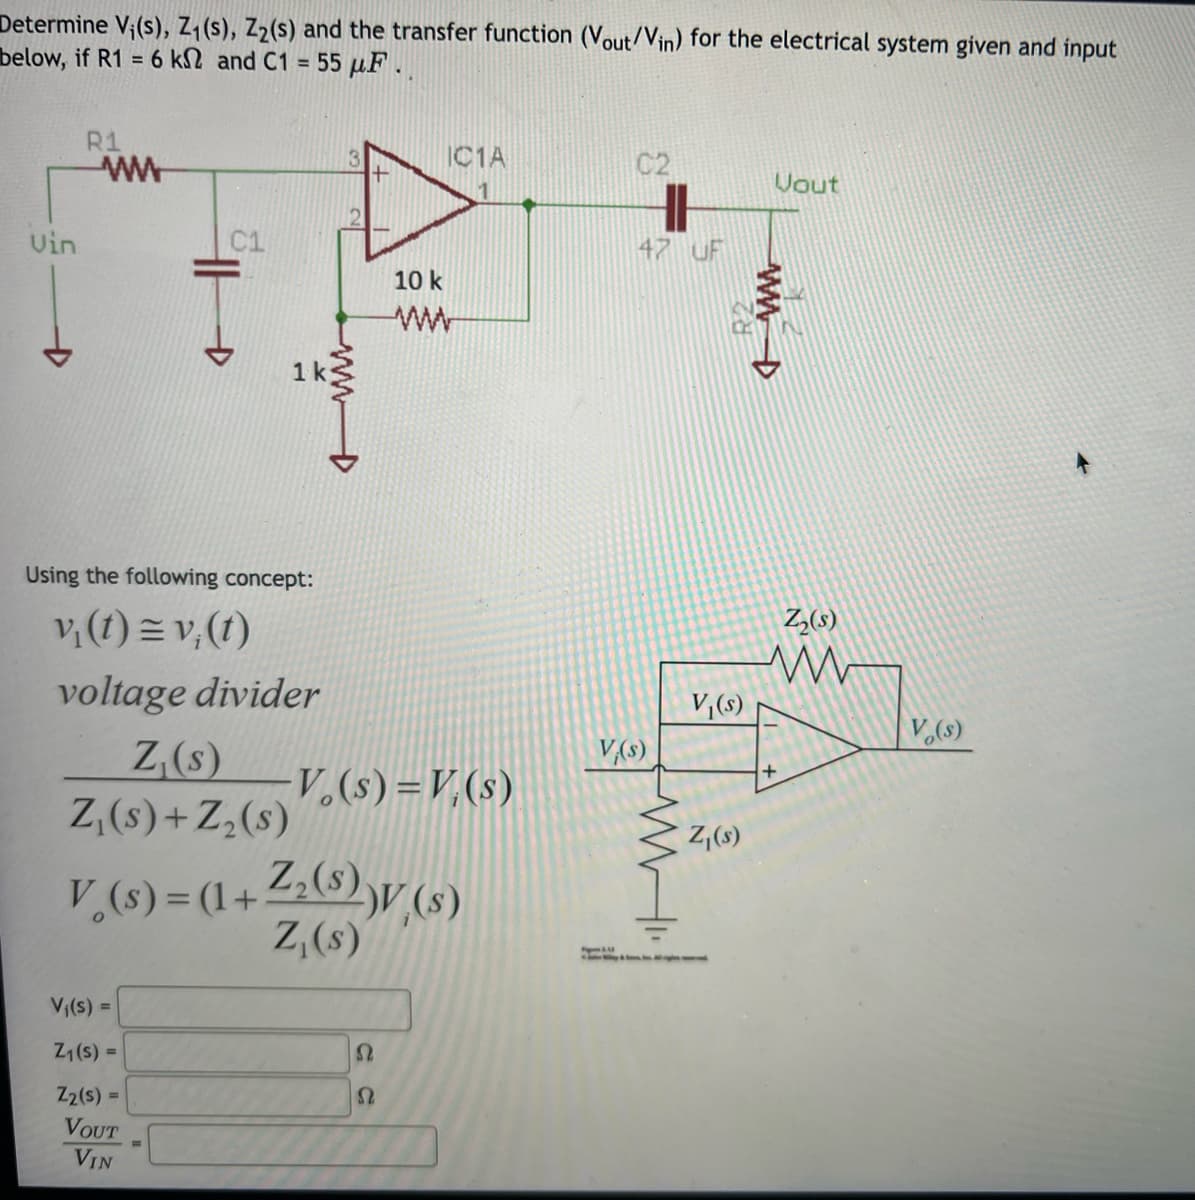 Determine V₁(s), Z₁ (s), Z₂(s) and the transfer function (Vout/Vin) for the electrical system given and input
below, if R1 = 6 k and C1 = 55 μF ..
Vin
R1
www
Using the following concept:
v₁ (1) = v₁ (1)
voltage divider
Z₁(s)
Z₁ (s) + Z₂ (s)
V₁(s) =
Z₁(s) =
Z2 (s) =
VOUT
VIN
IC1A
V. (s) = V₁(s)
V. (s) = (1 + Z₂(S))V,(s)
Z₁(s)
Ω
10 k
www
Ω
C2
Fig 3.12
47 UF
V,(s)
WWW.
V₁(s)
Z₁(s)
Vout
WWW
+
Z₂(s)
V.(s)